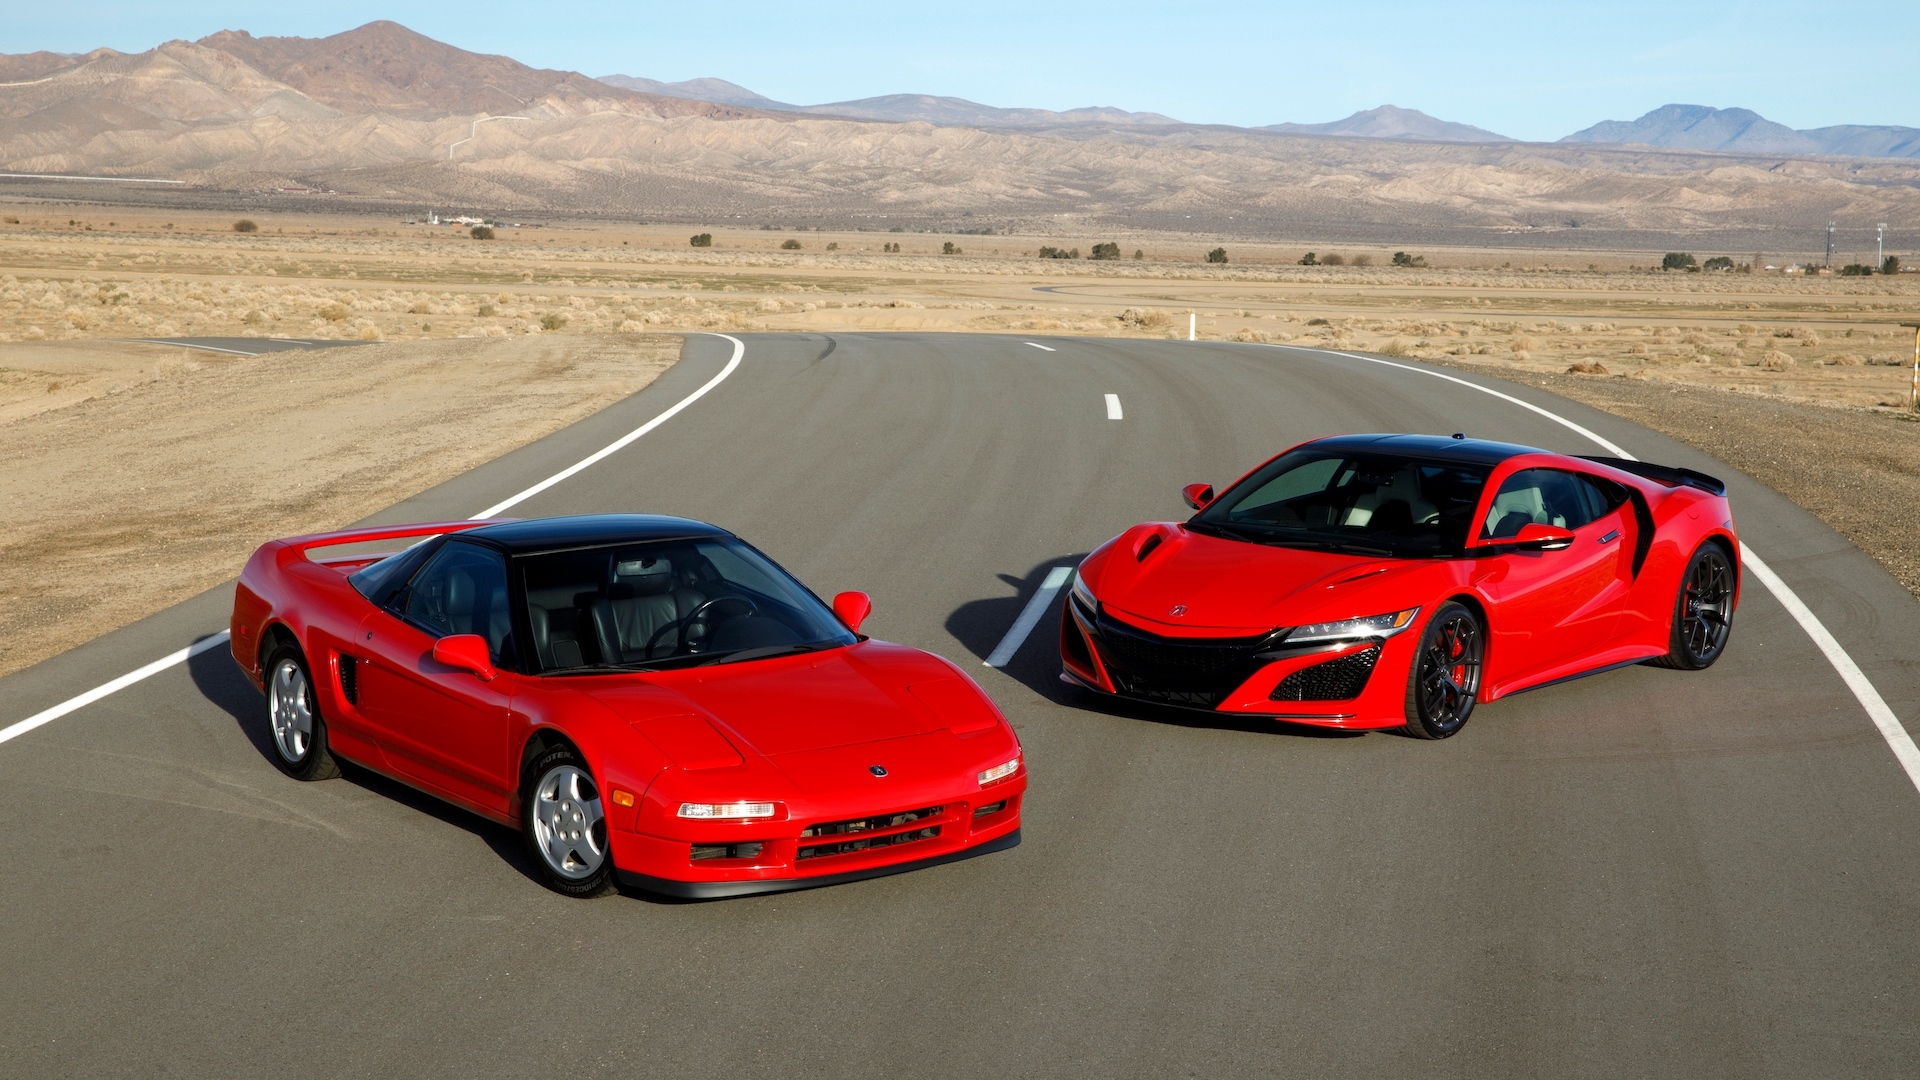 Both generations of the Acura NSX